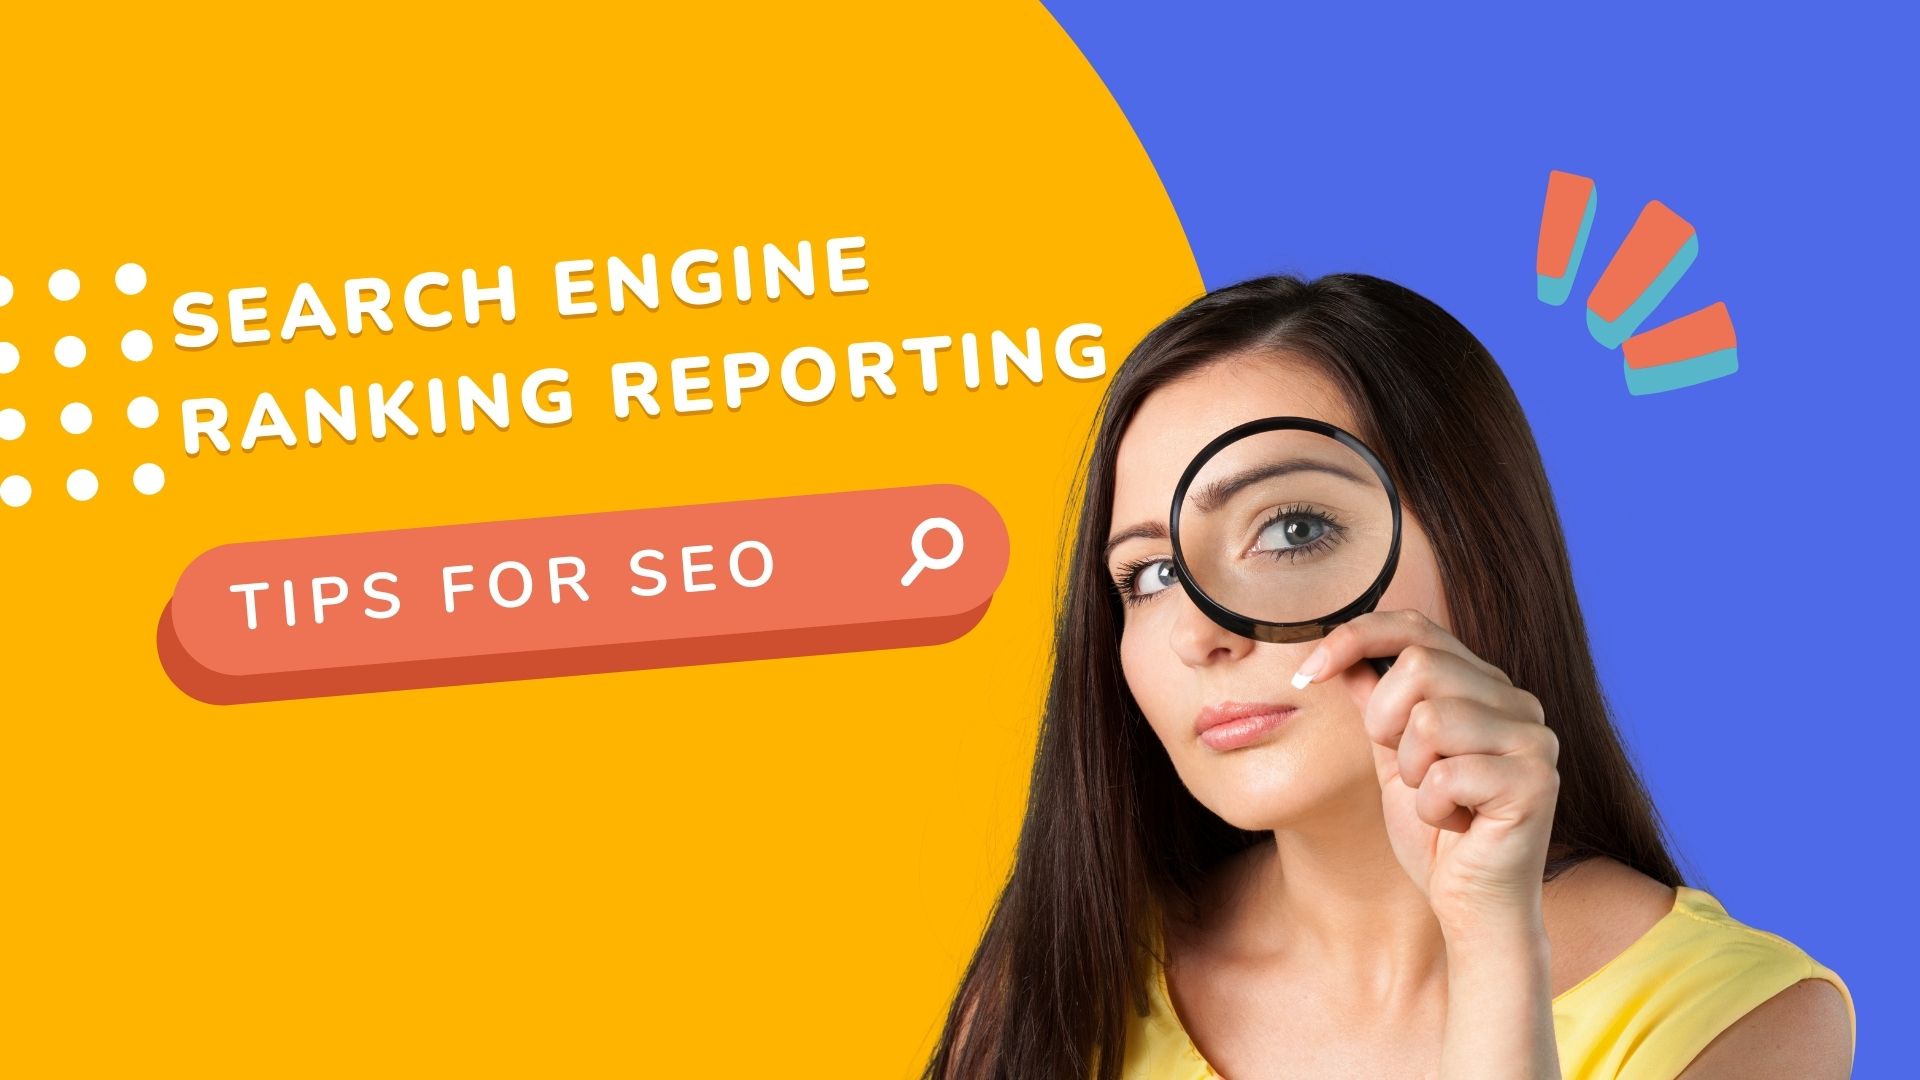 Search Engine Ranking Report: Proven Tips for SEO